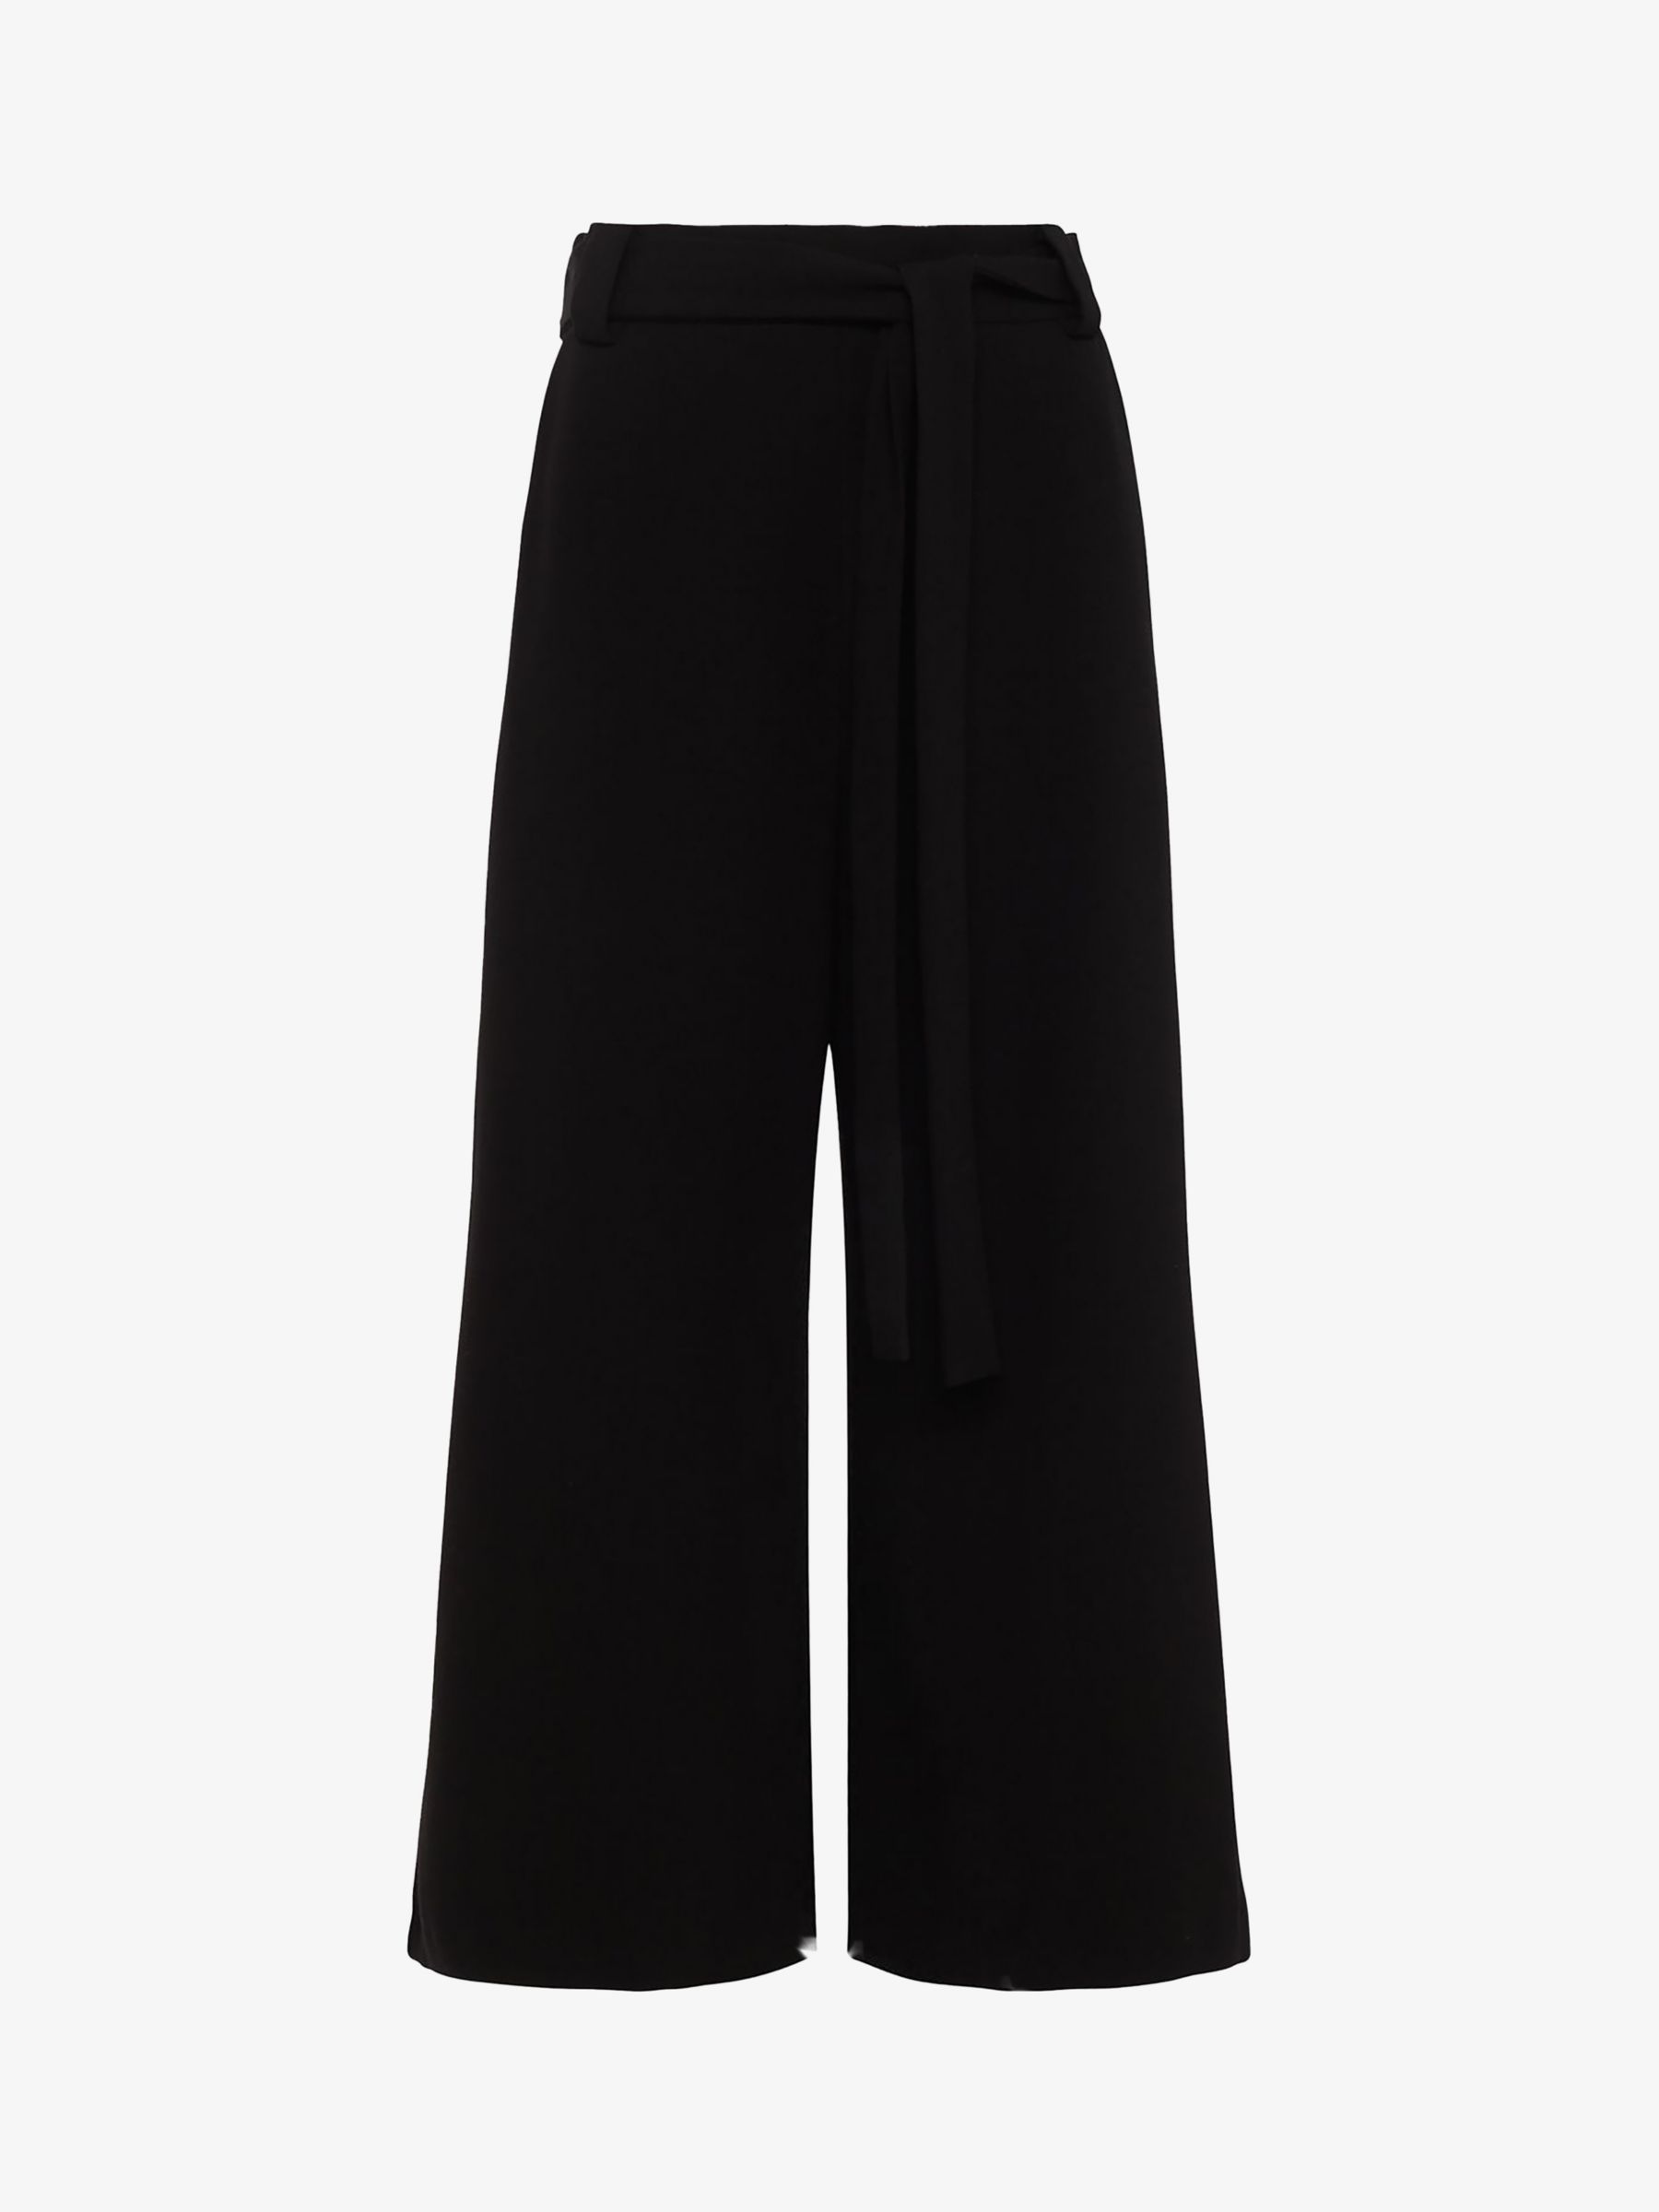 French Connection Whisper Belted Culottes, Black, 6